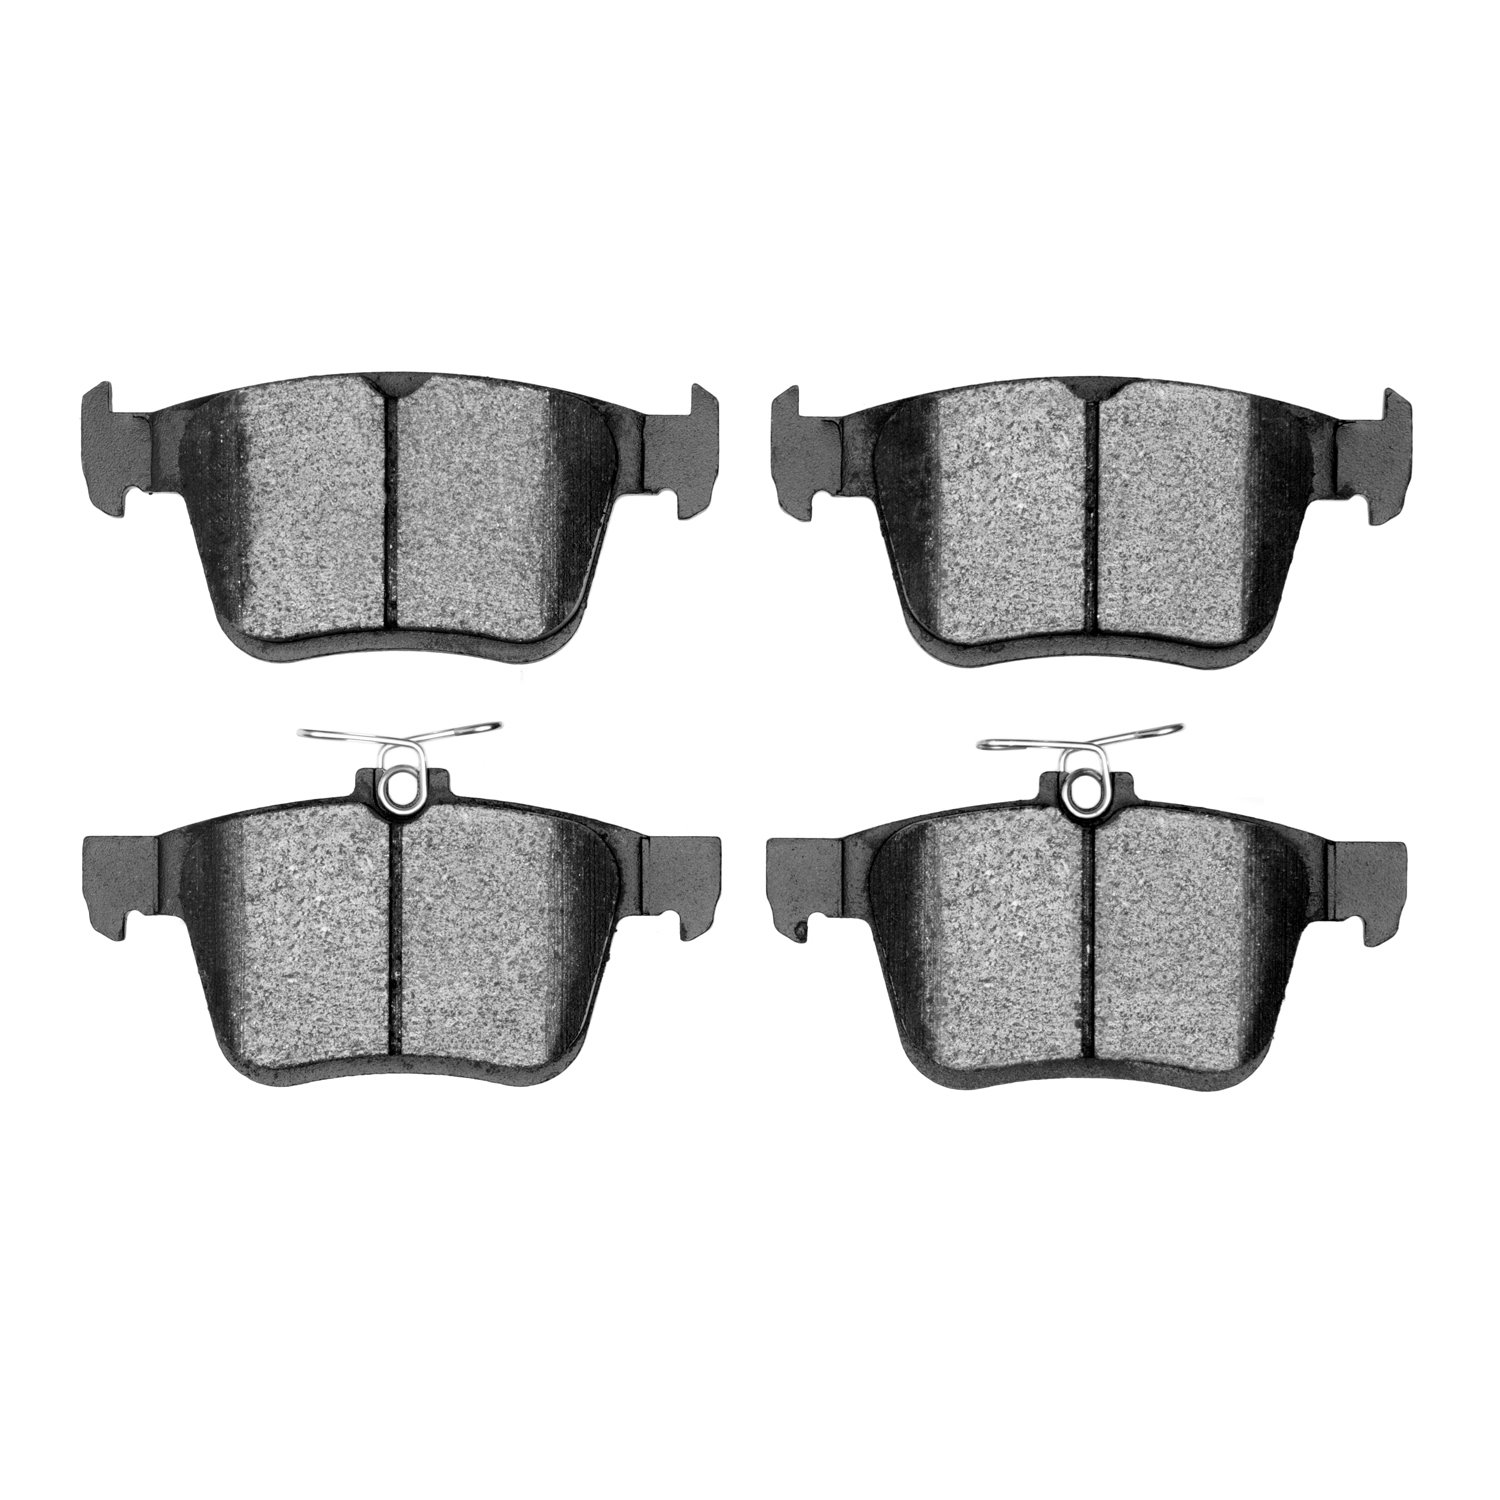 1115-1761-00 Active Performance Low-Metallic Brake Pads, Fits Select Multiple Makes/Models, Position: Rear